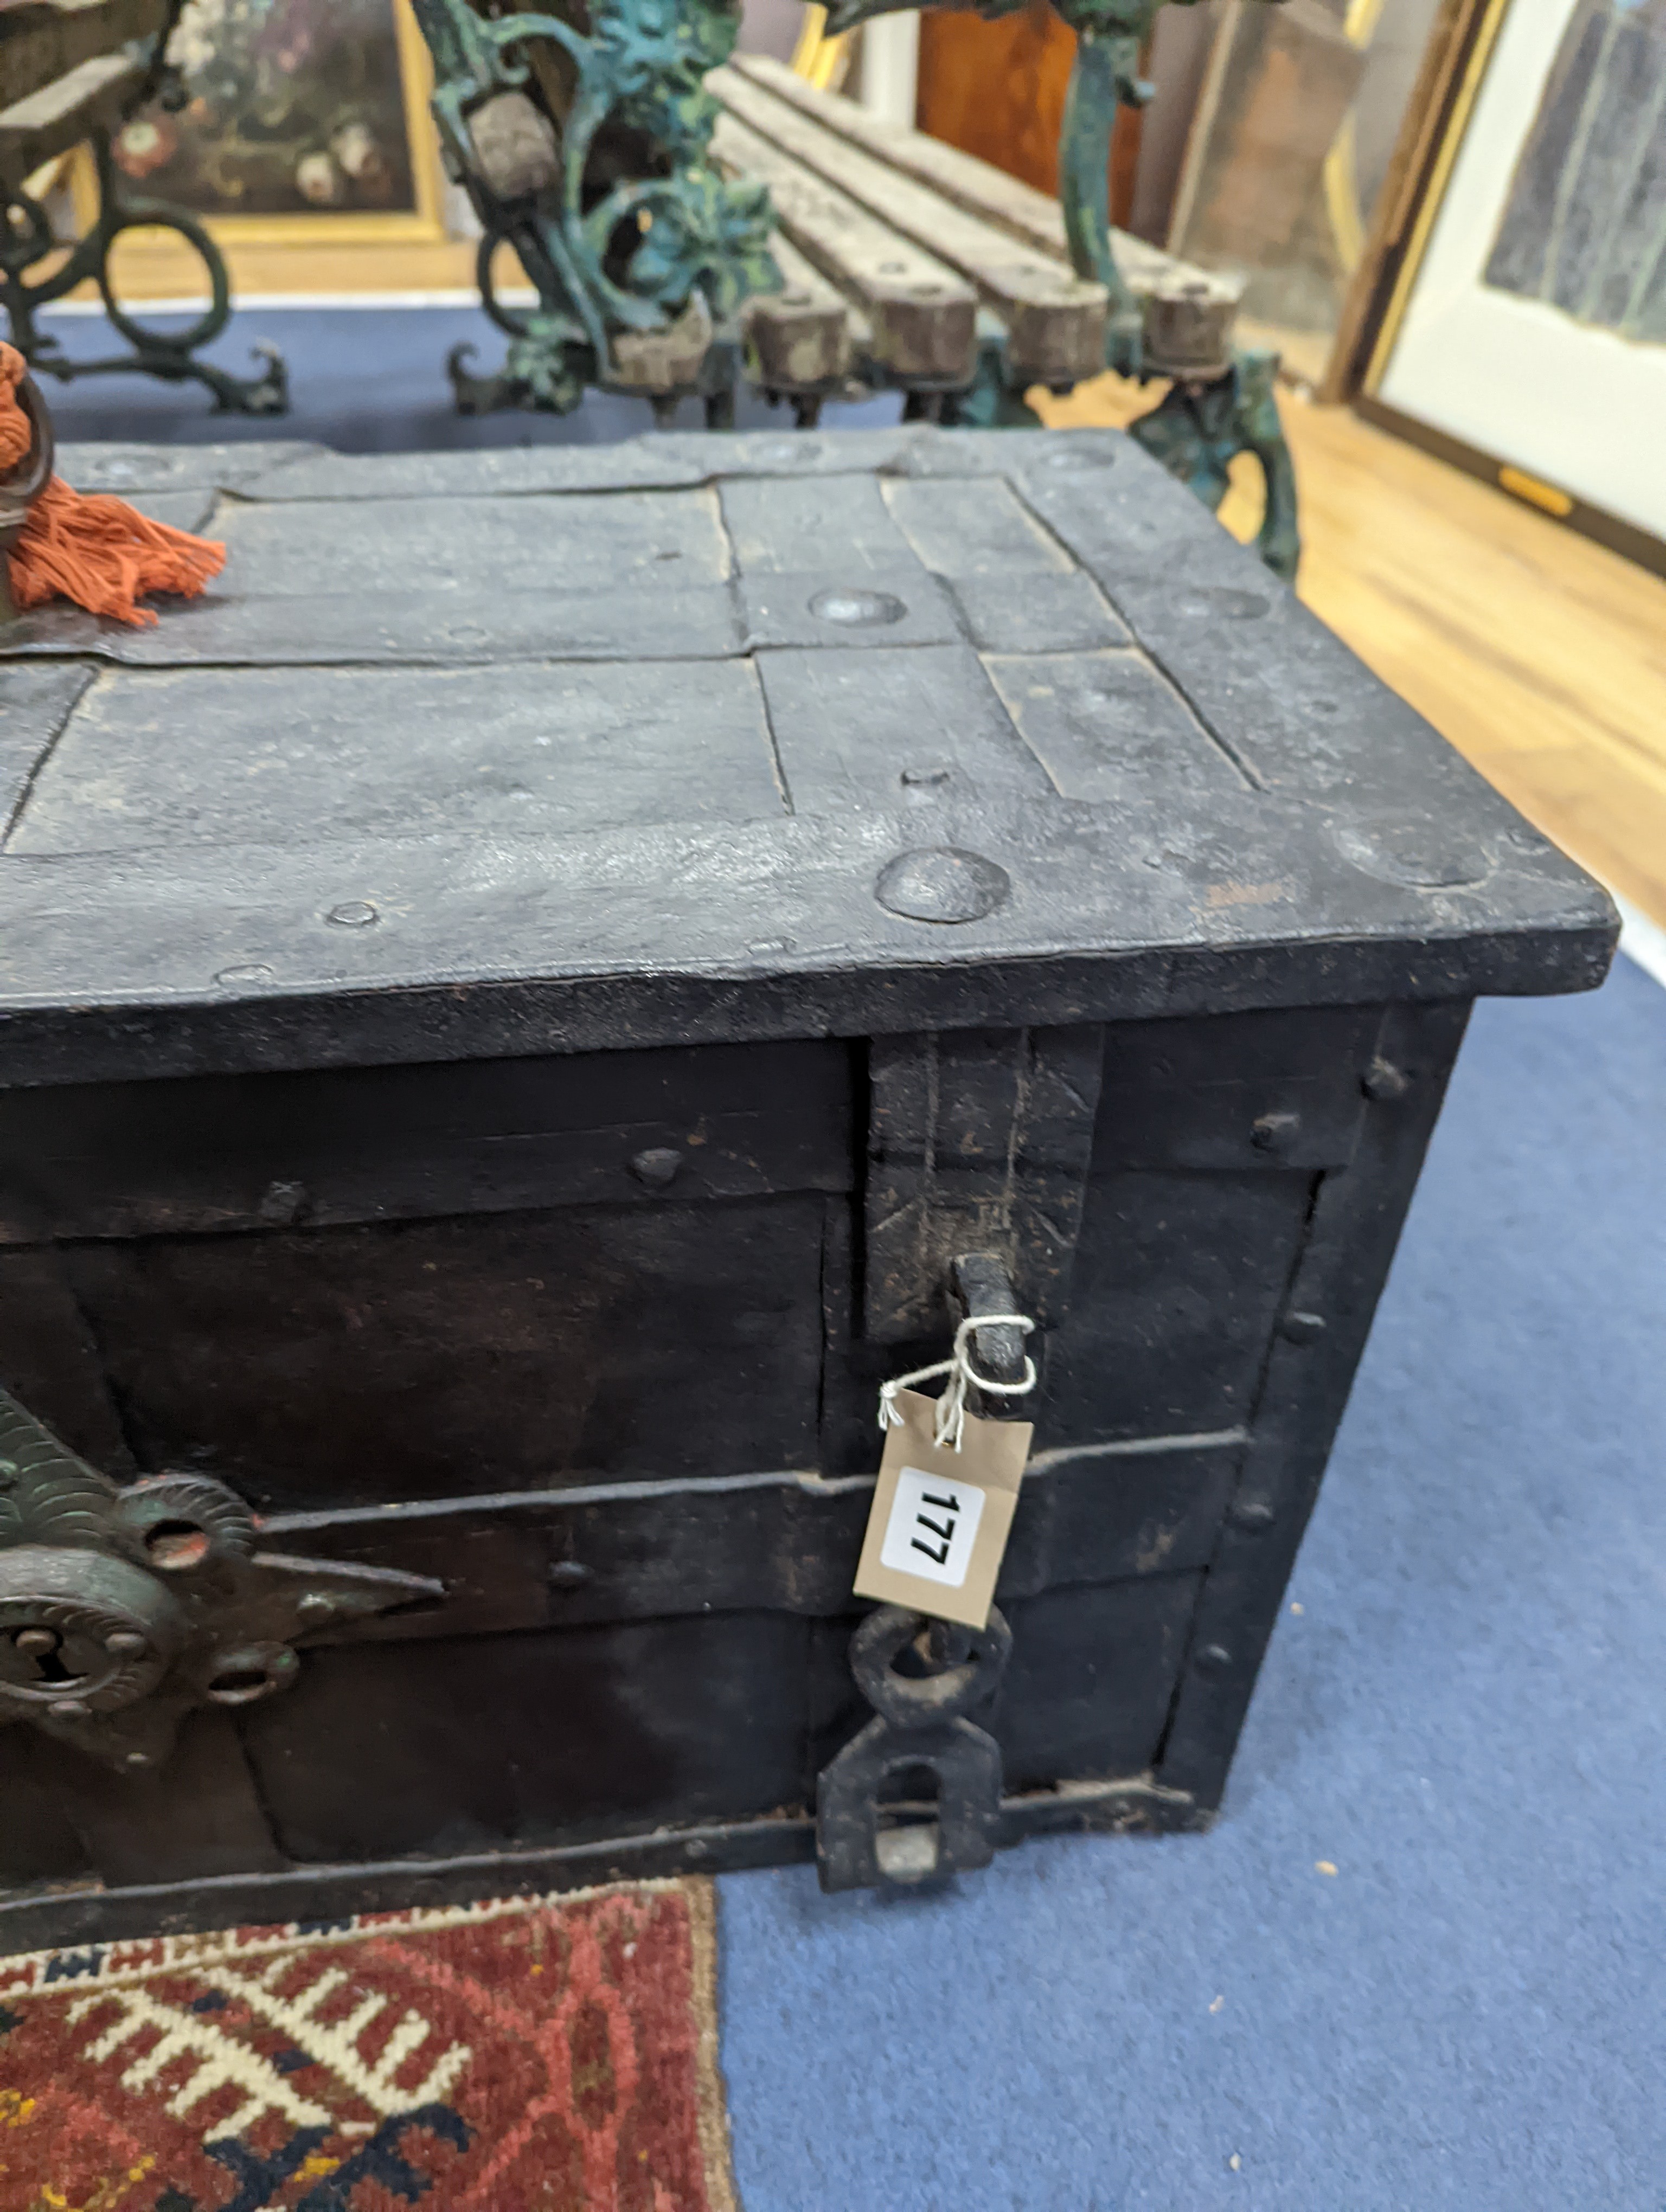 A 17th/18th century German ironbound 'Armada' chest, with key